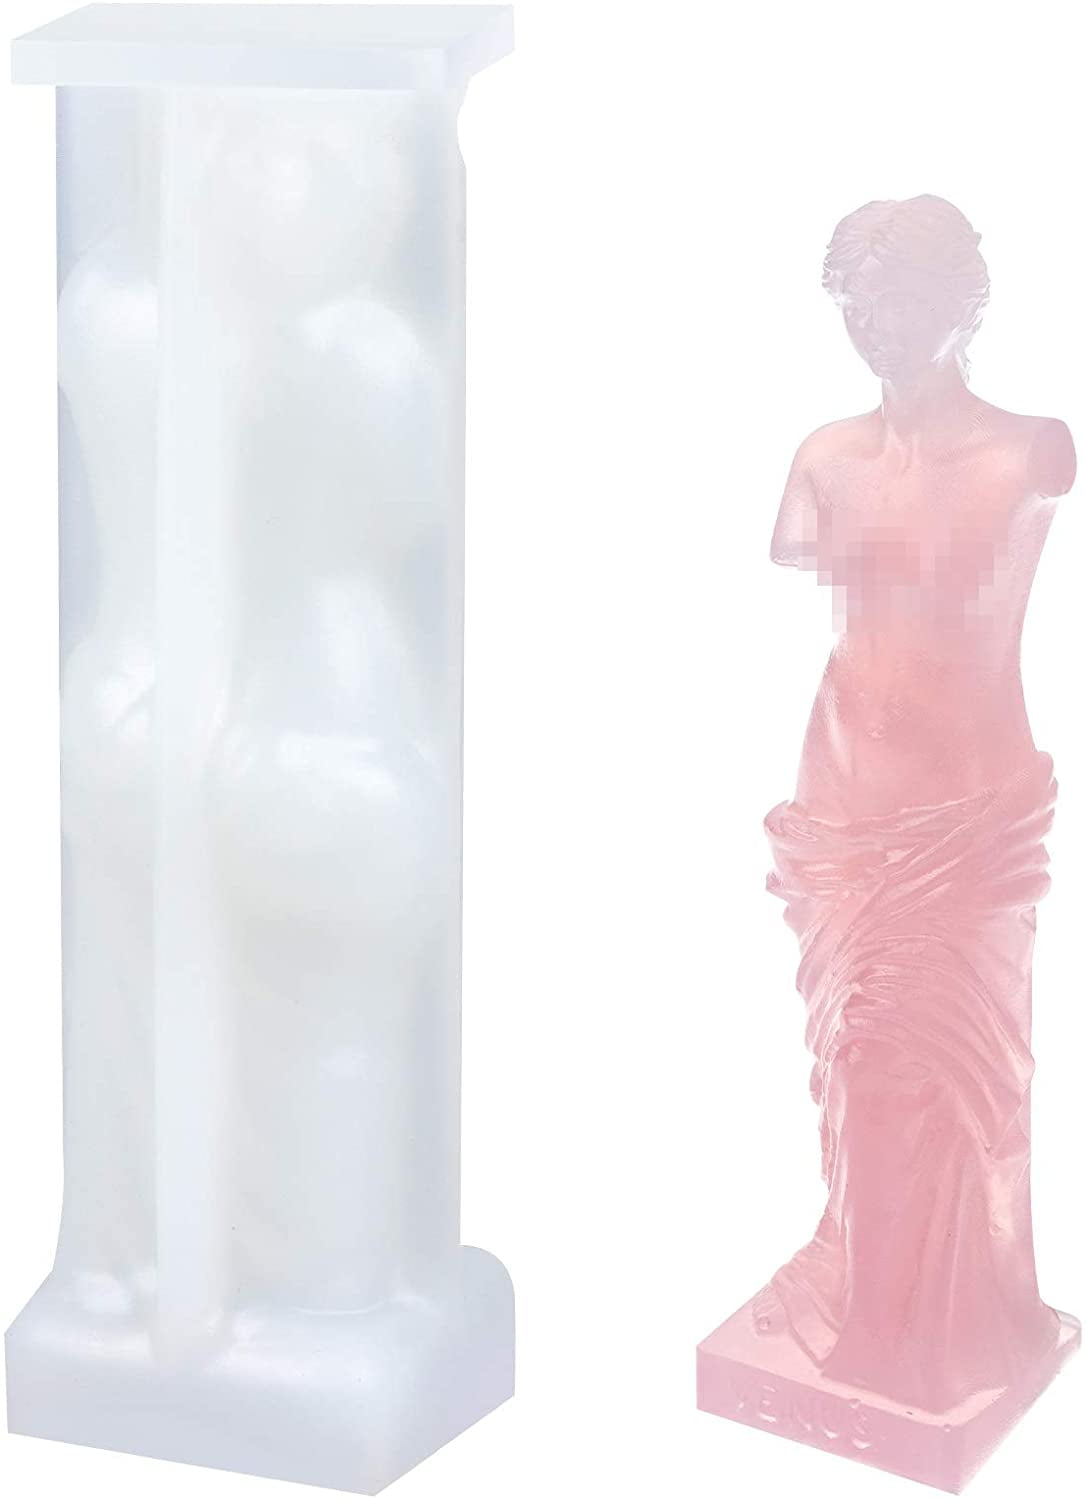 3D Venus Goddess Body Mould,Roman Mythology Goddess Body Silicone Moulds,DIY Homemade Soap Candles Soy Wax Mould for Epoxy Resin Casting DIY Craft